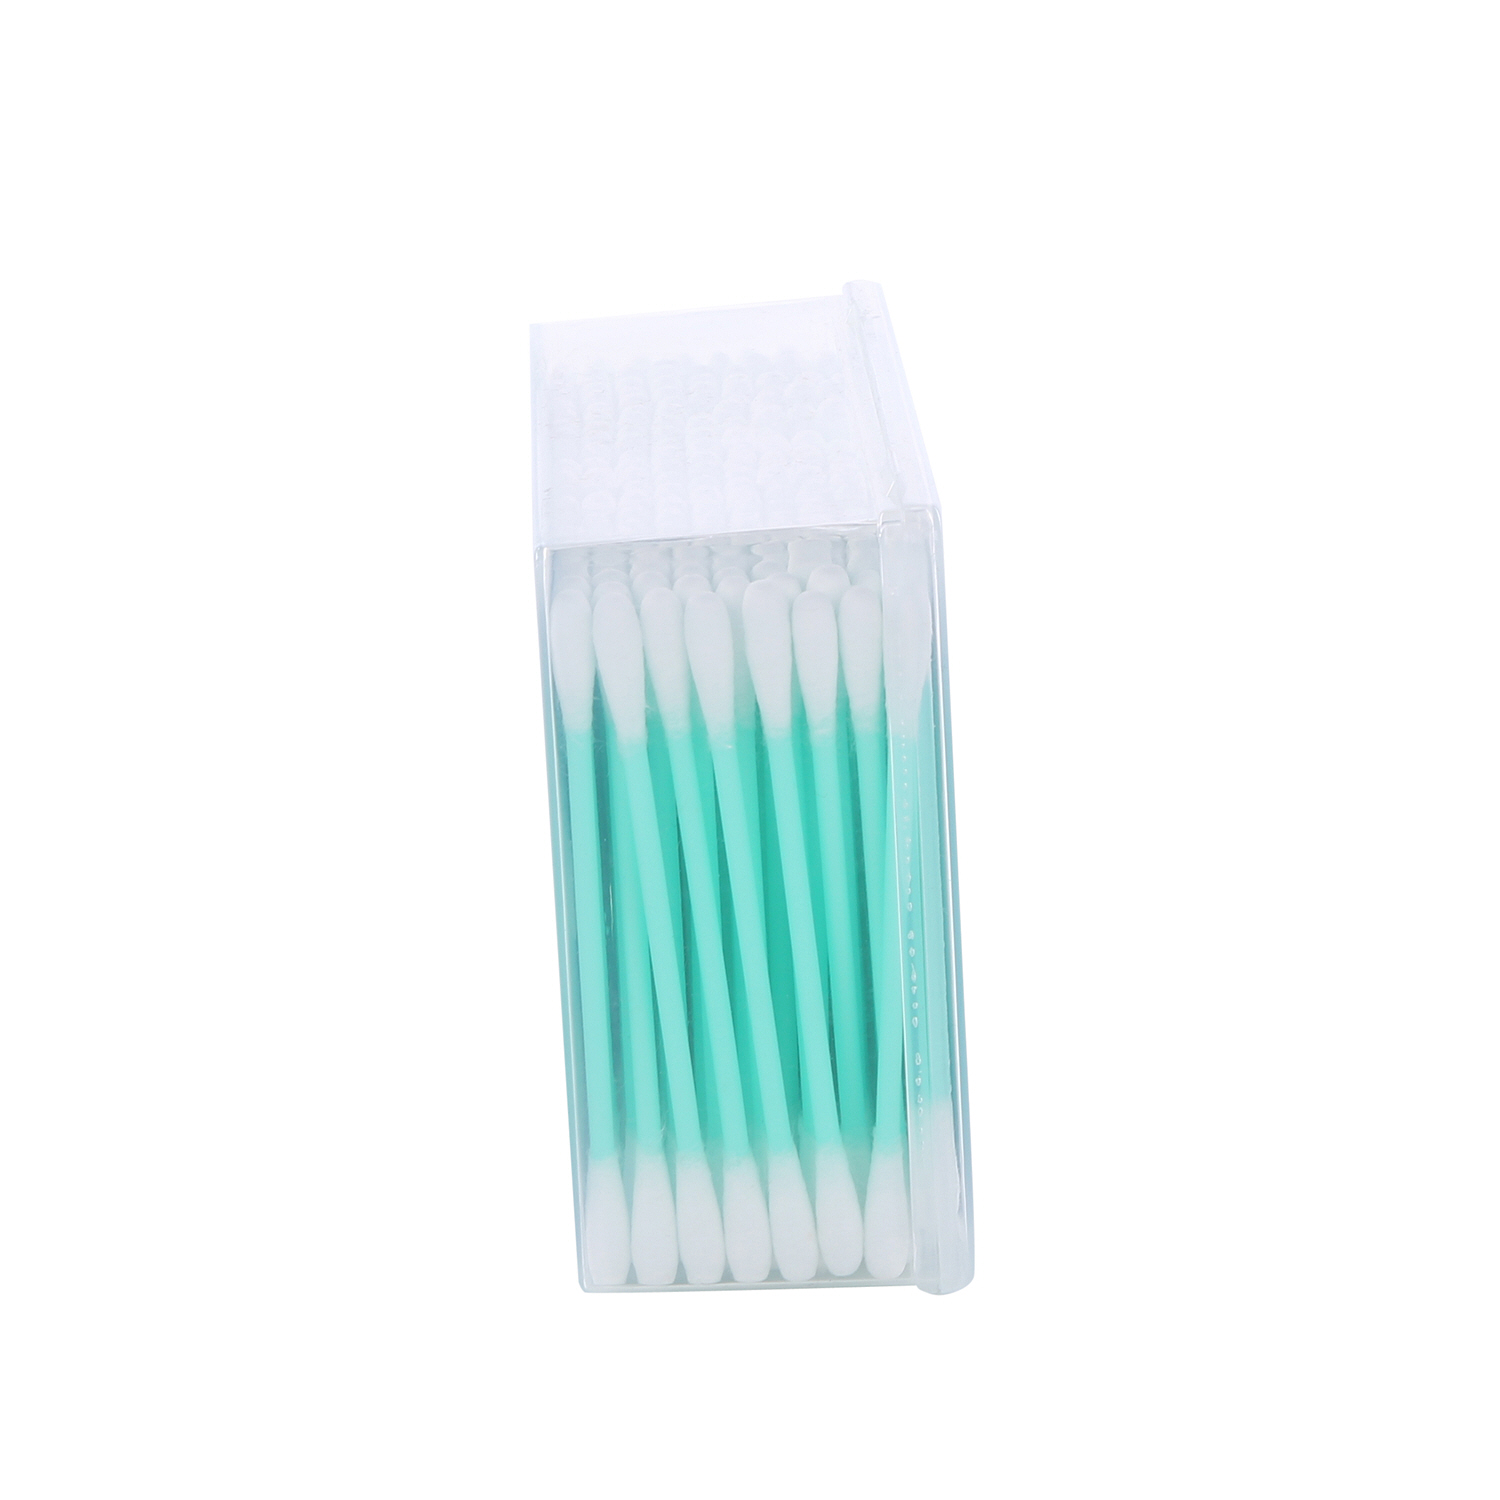 Cool & Cool Cotton Buds 200 Buds